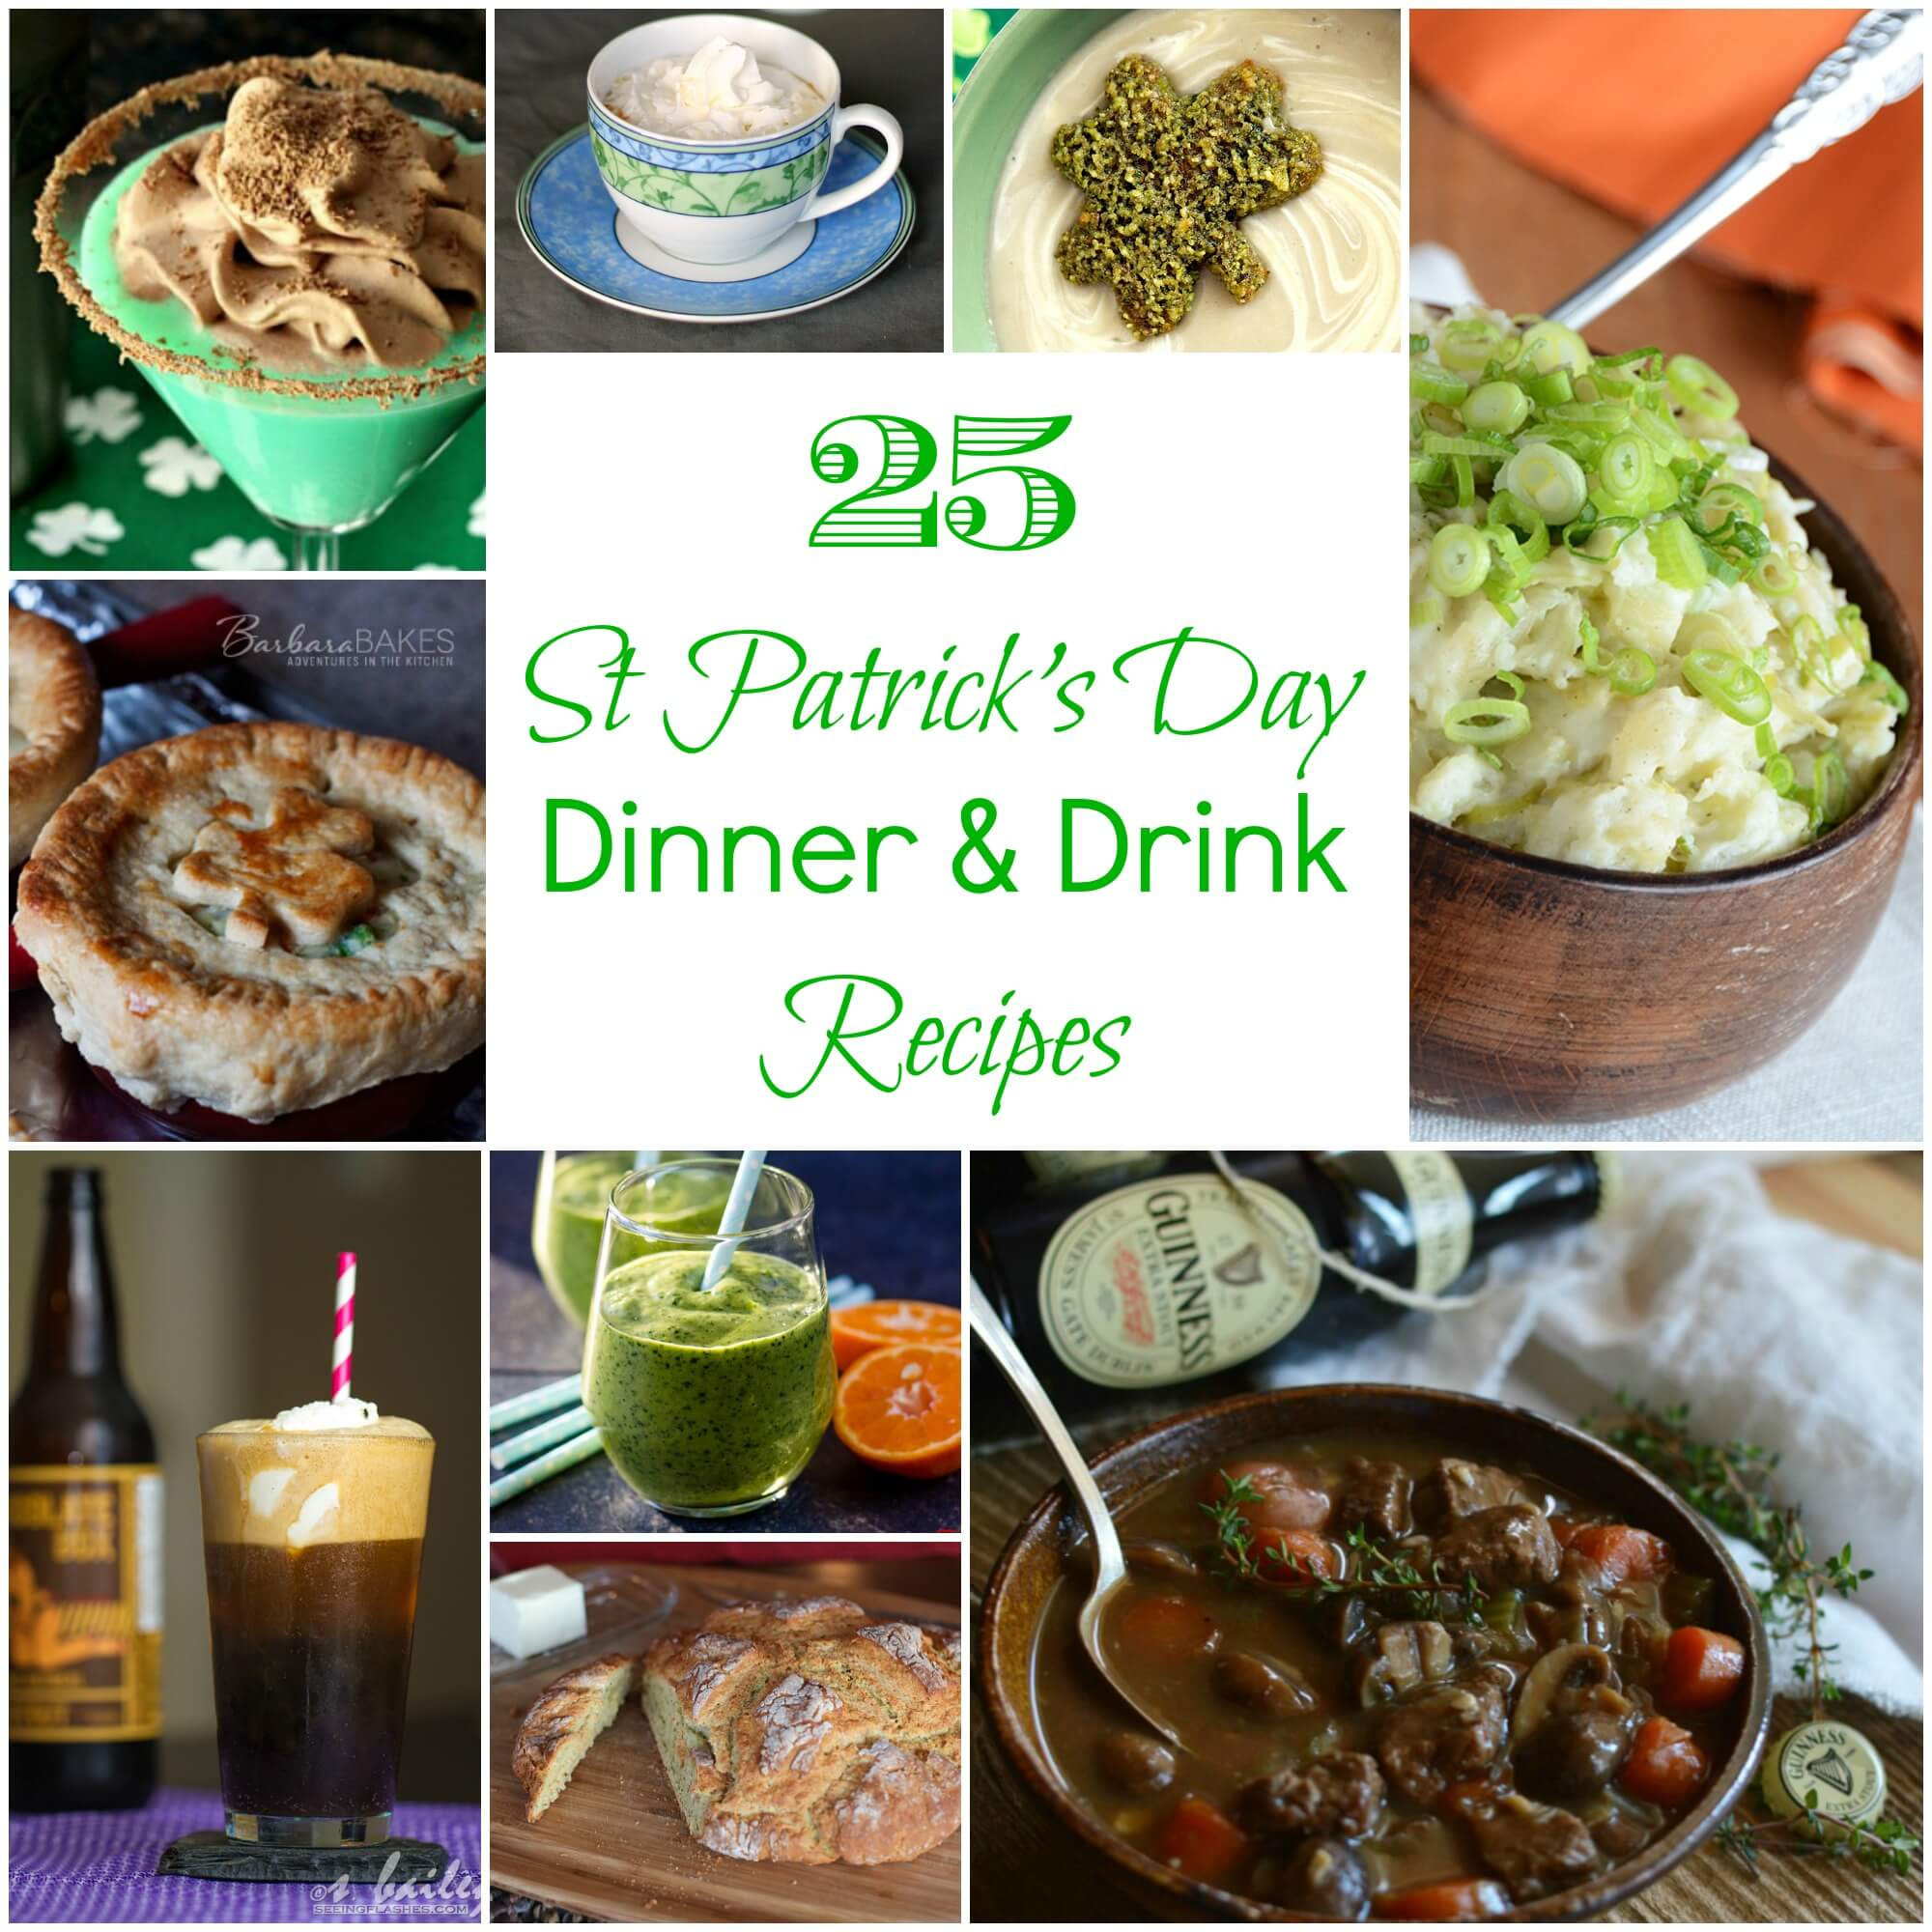 St Patrick's Day Dinner Ideas
 25 St Patrick s Day Dinner & Drink Recipes Flavor Mosaic